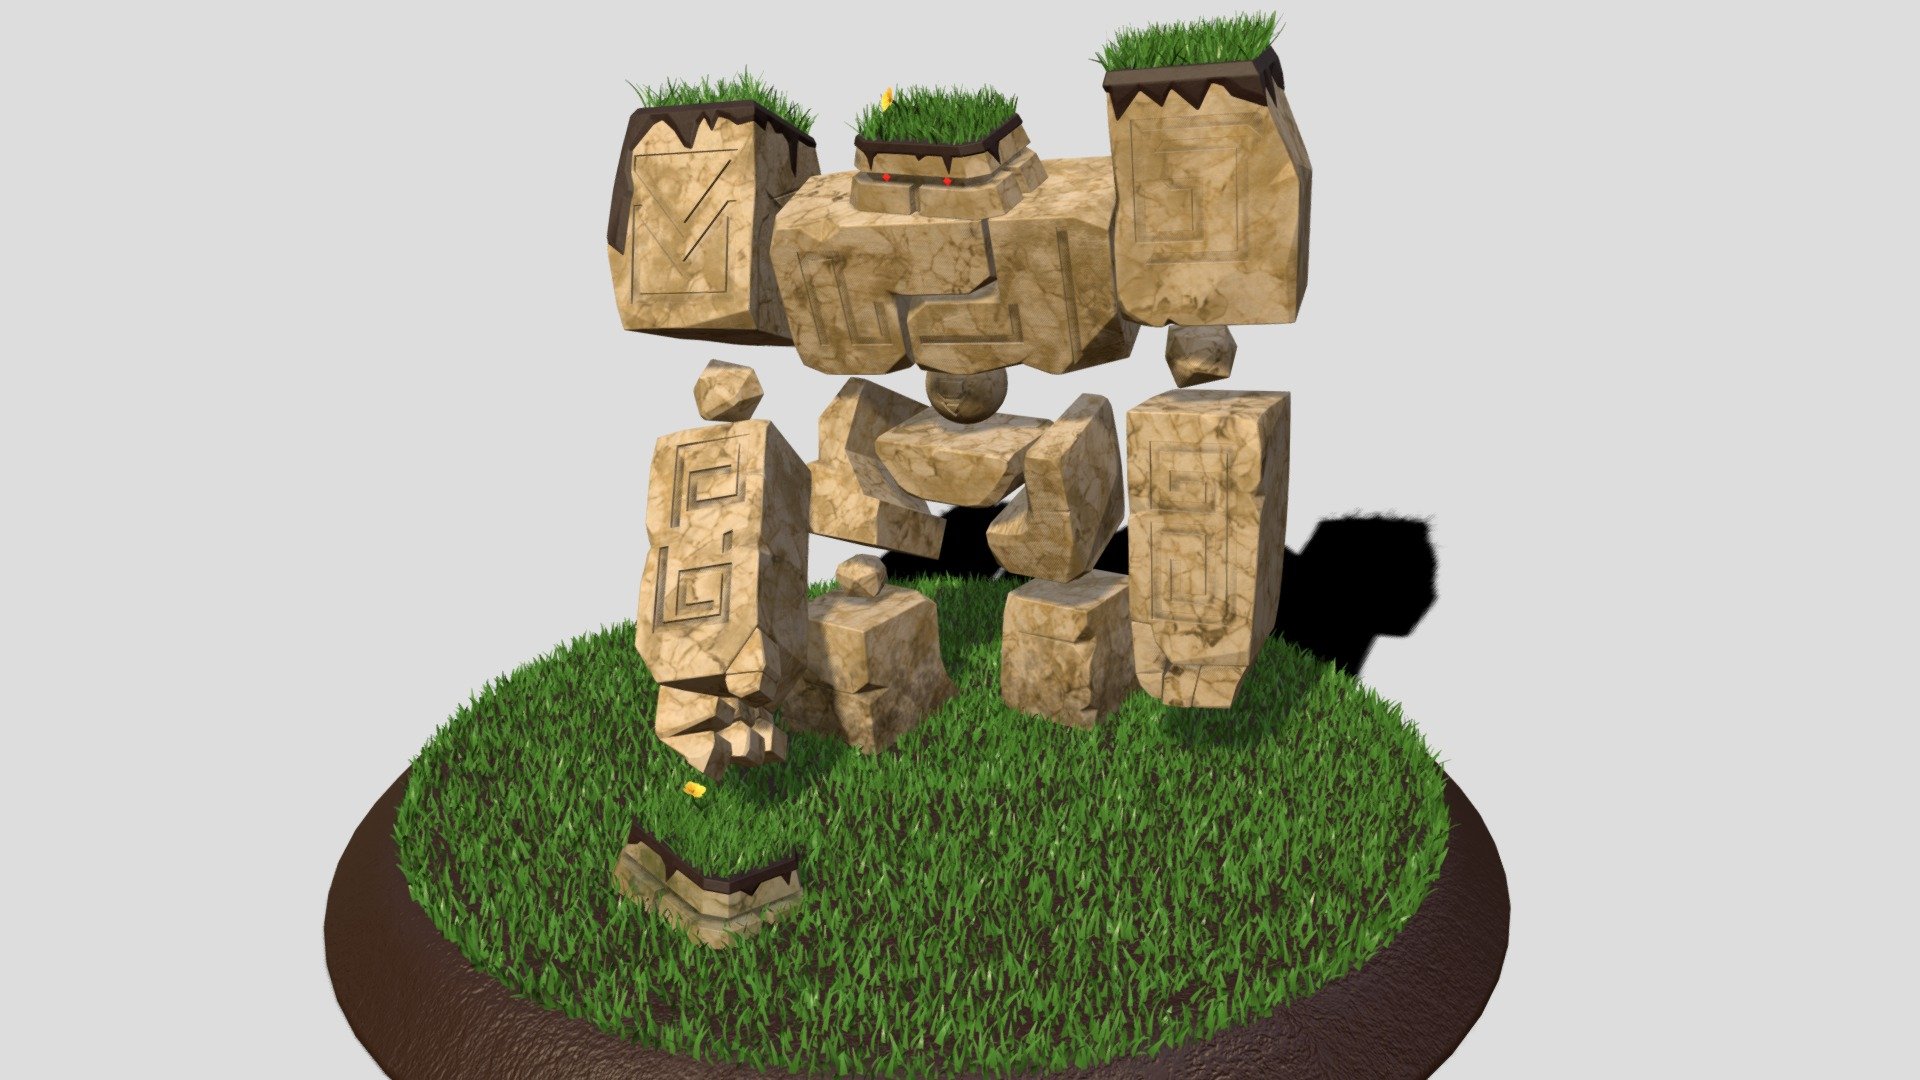 Fan-made 3D recreation of the Stone Golem from Maplestory, the game by NEXON 3d model